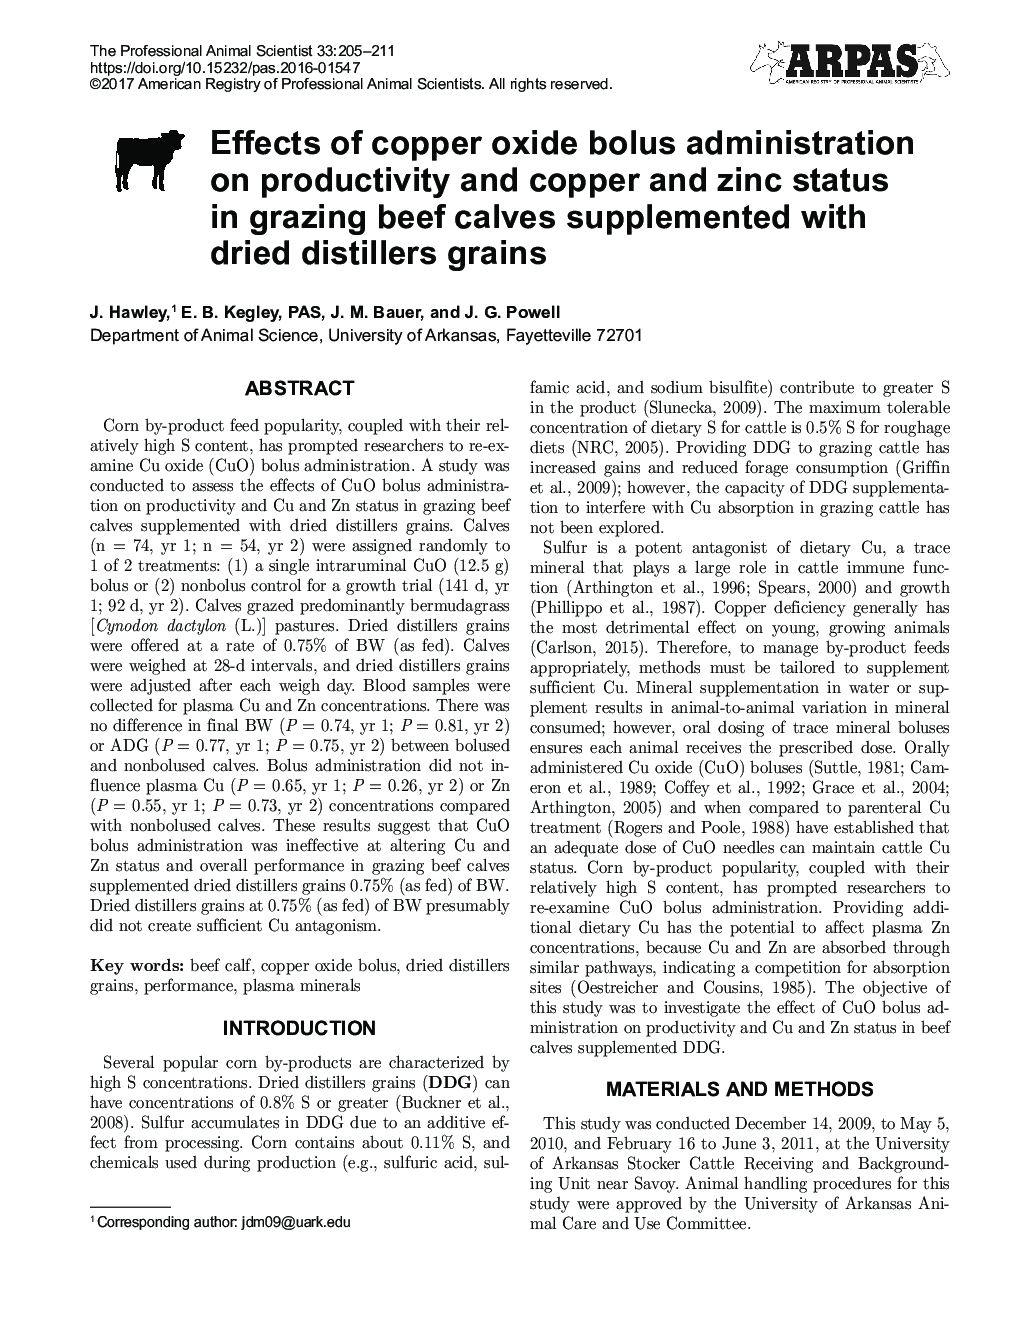 Effects of copper oxide bolus administration on productivity and copper and zinc status in grazing beef calves supplemented with dried distillers grains